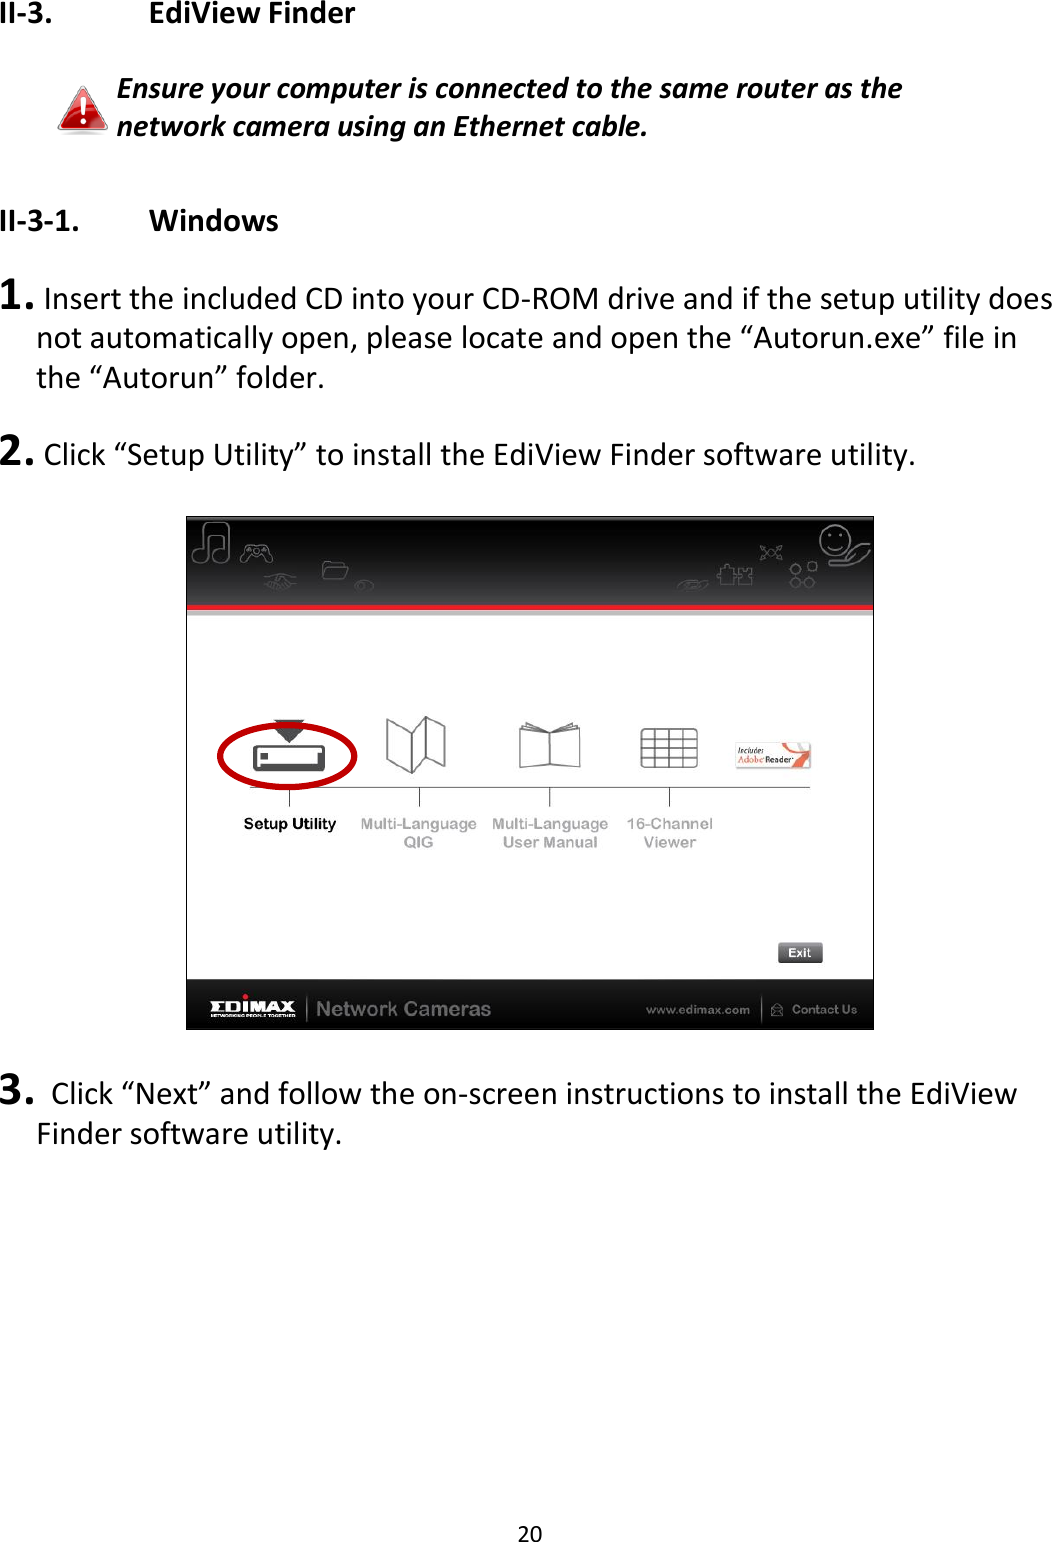 20  II-3.    EdiView Finder   Ensure your computer is connected to the same router as the network camera using an Ethernet cable.  II-3-1.    Windows  1.  Insert the included CD into your CD-ROM drive and if the setup utility does not automatically open, please locate and open the “Autorun.exe” file in the “Autorun” folder.  2.  Click “Setup Utility” to install the EdiView Finder software utility.    3.   Click “Next” and follow the on-screen instructions to install the EdiView Finder software utility.  